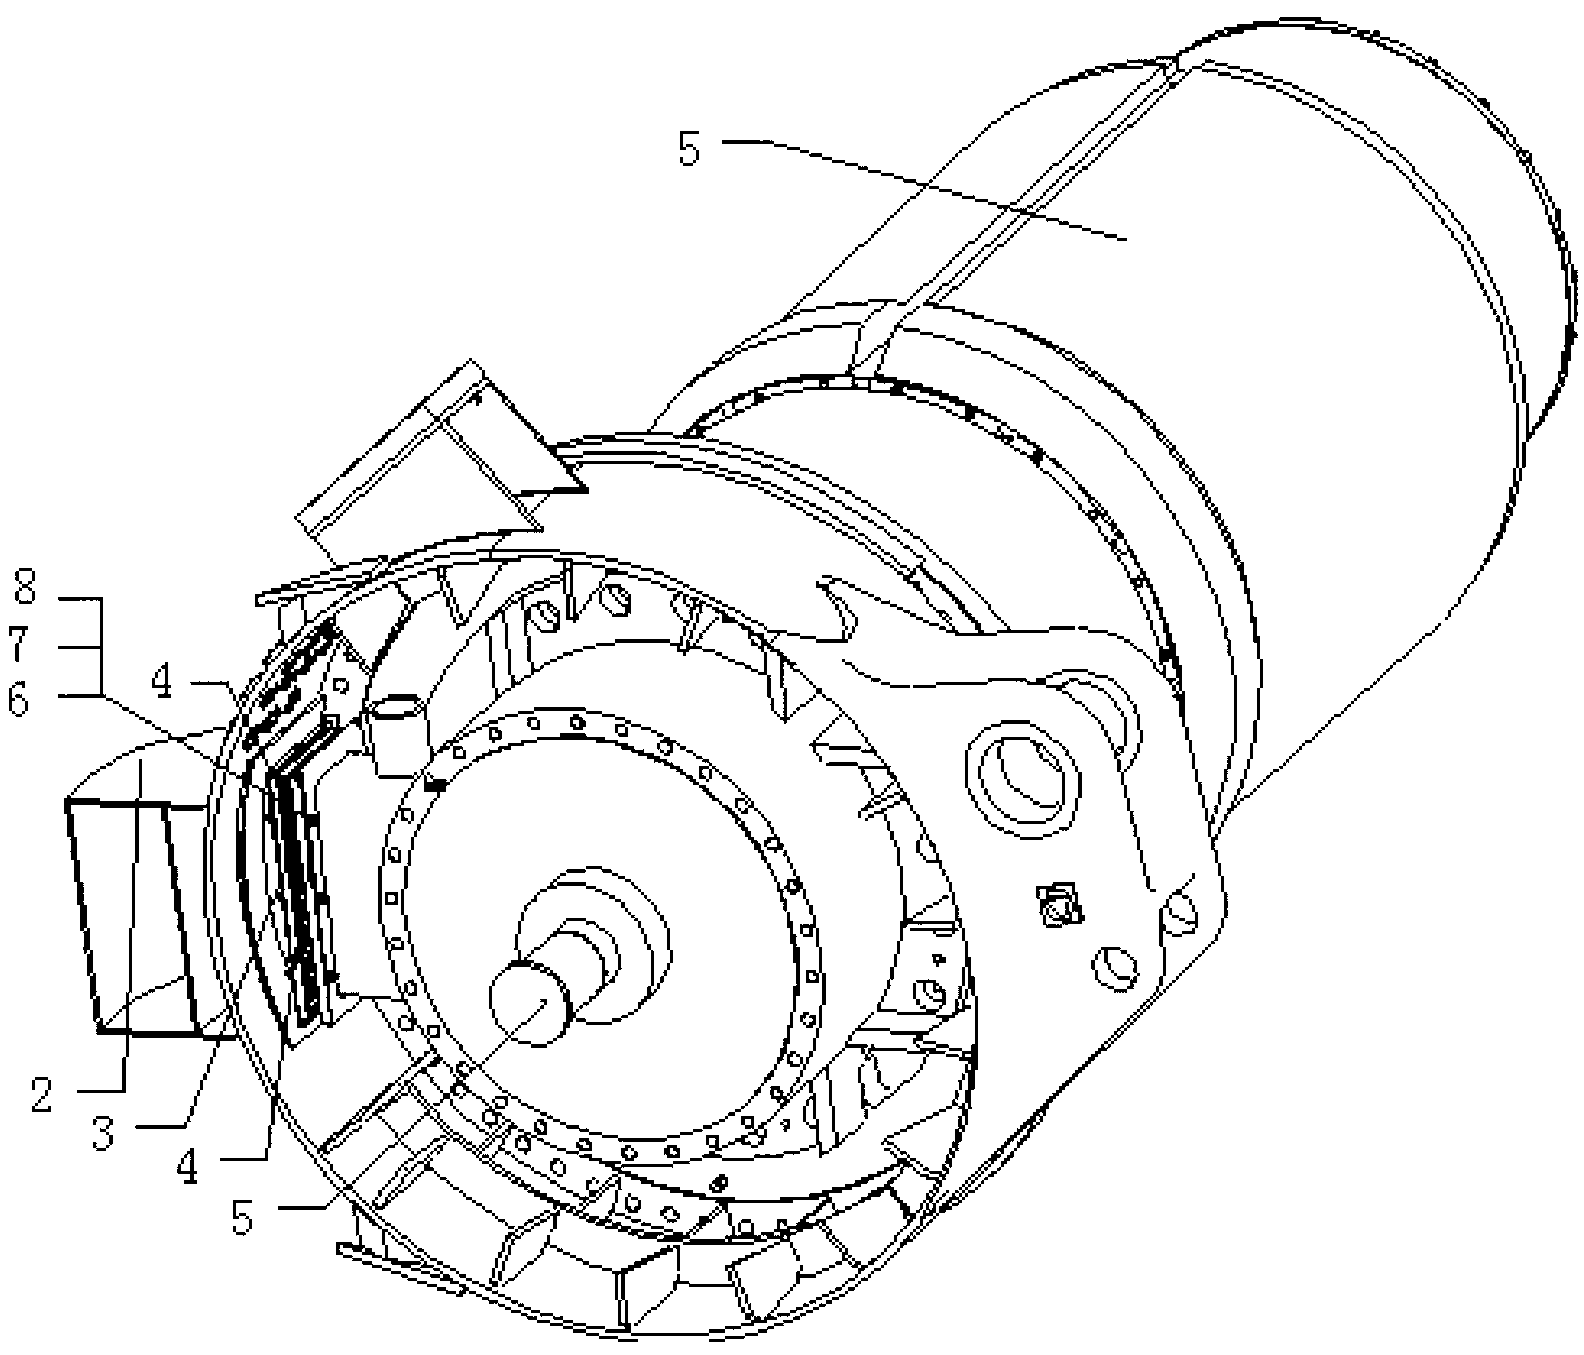 Soft airway structure of electric driving mining dump vehicle for connecting rear axle housing and motor